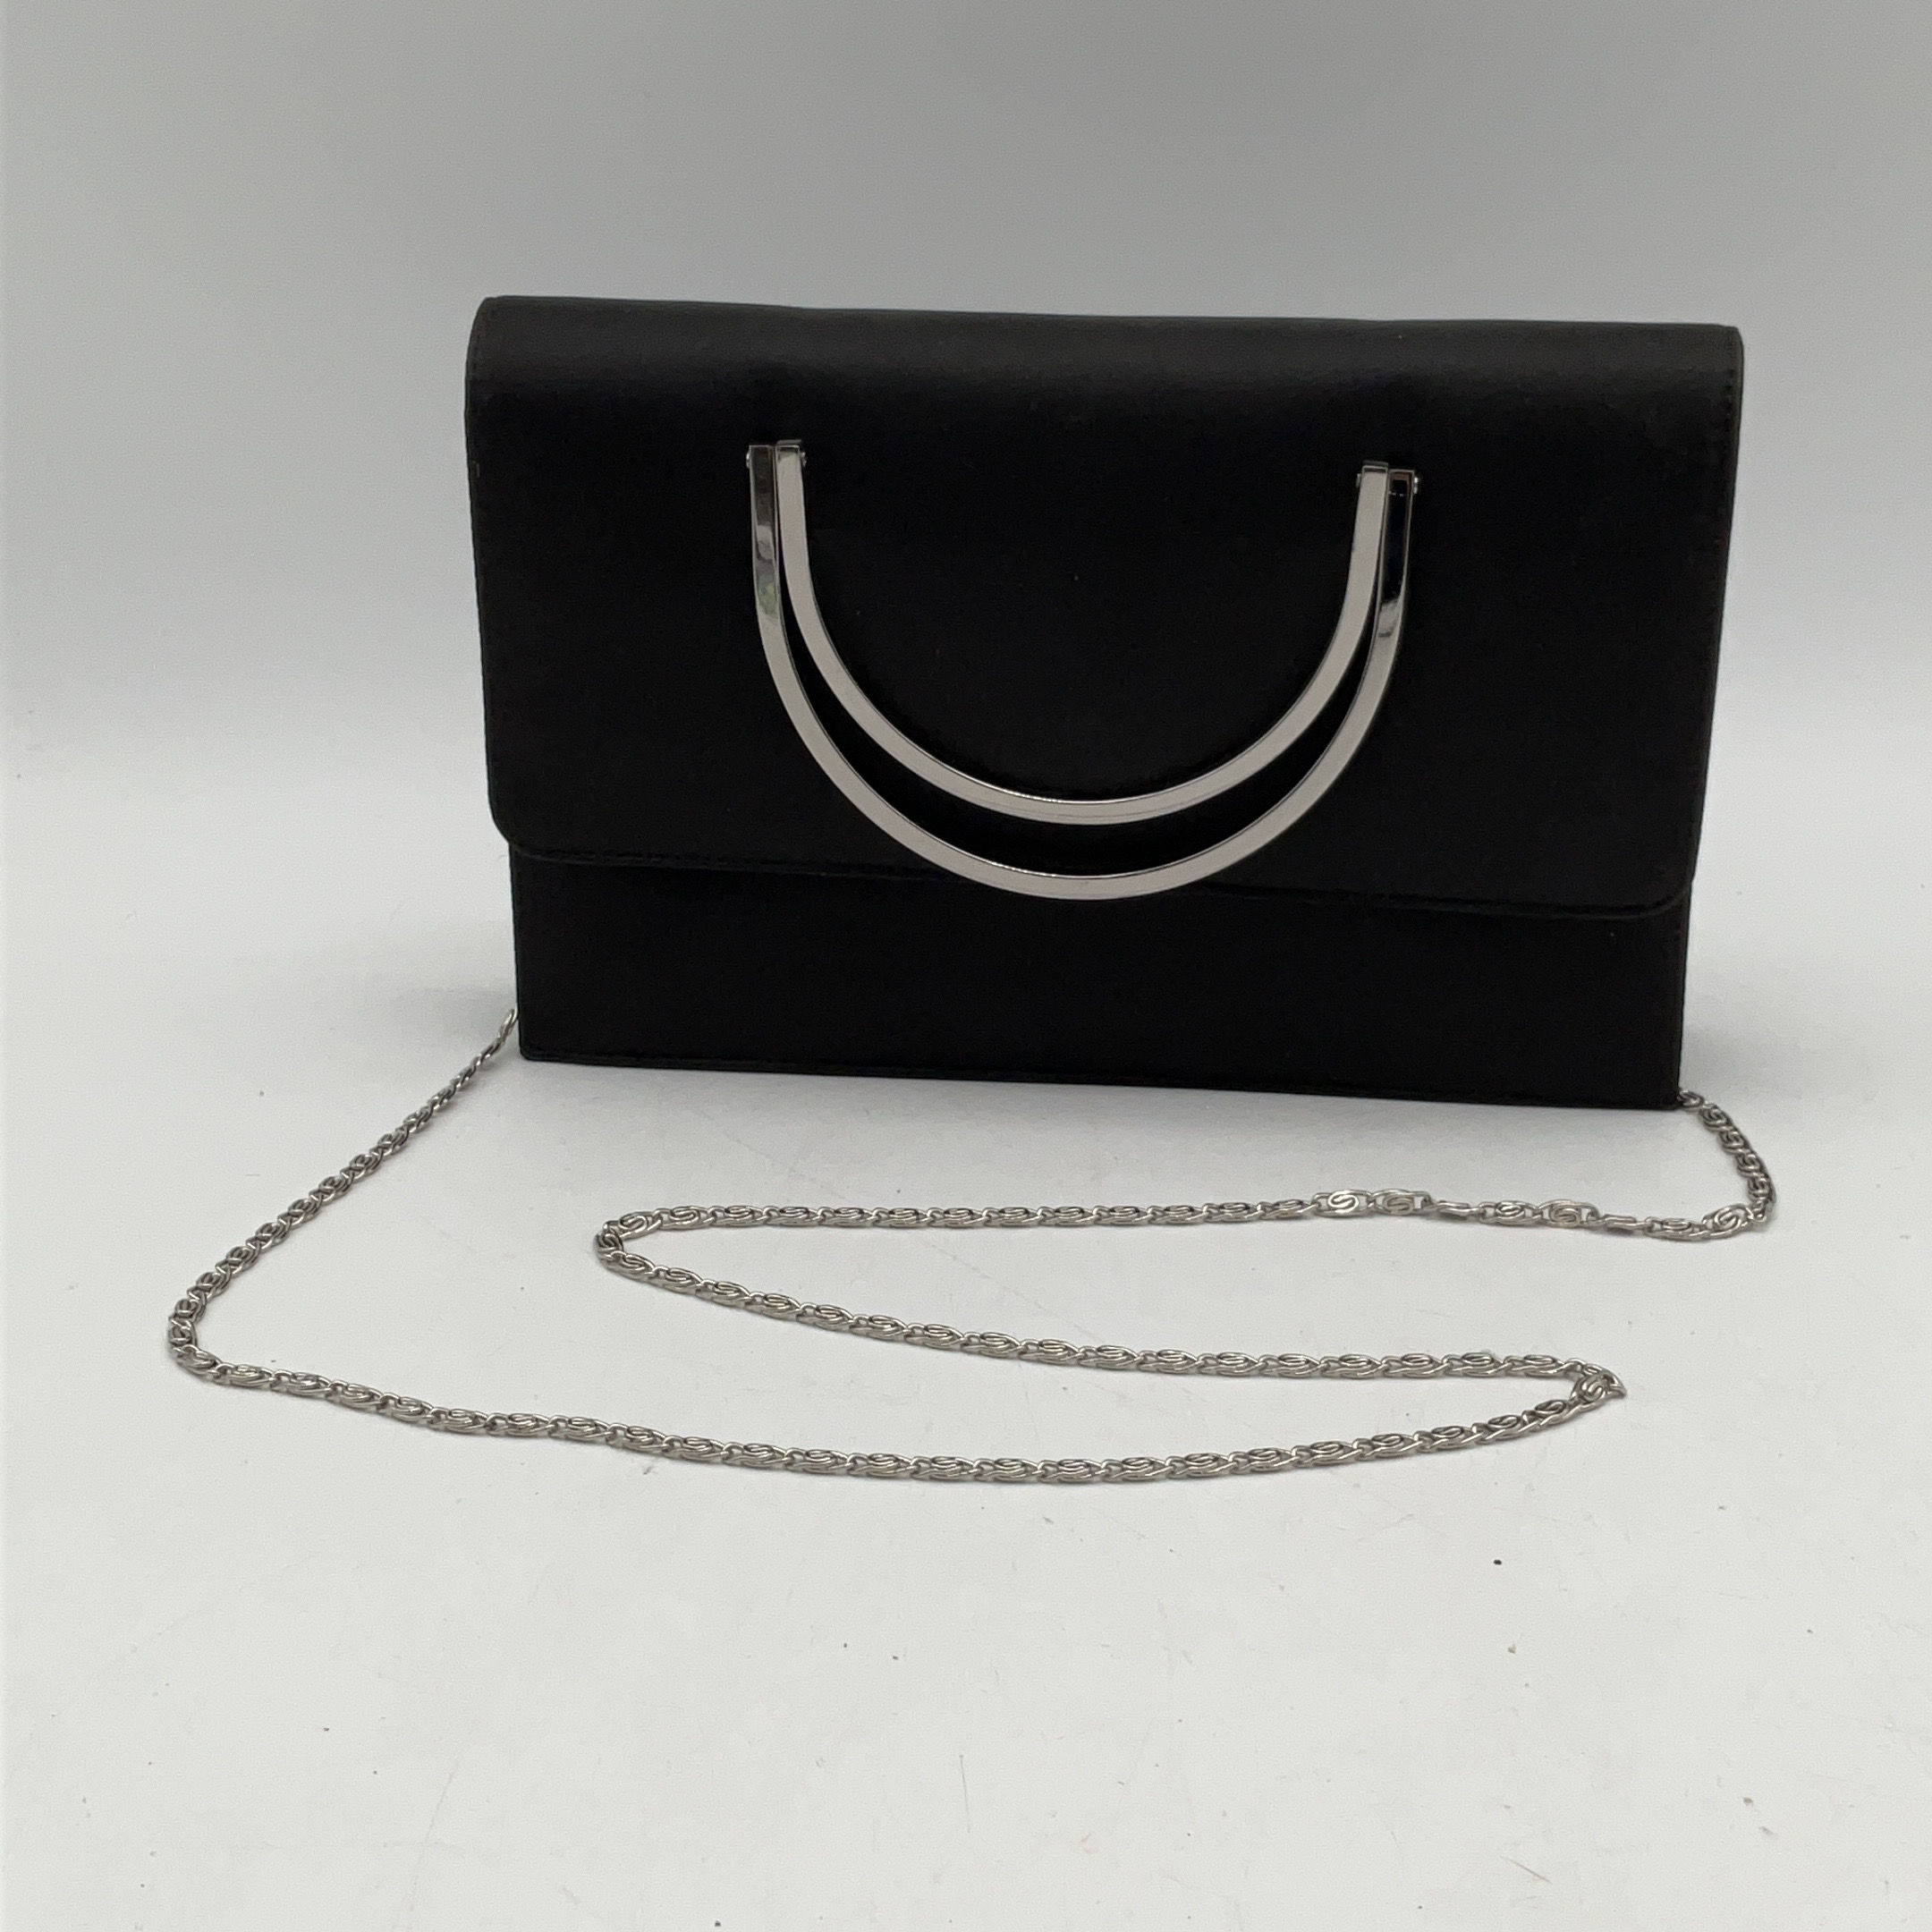 Buy the Womens Black Leather Chain Strap Inner Pocket Snap Flap